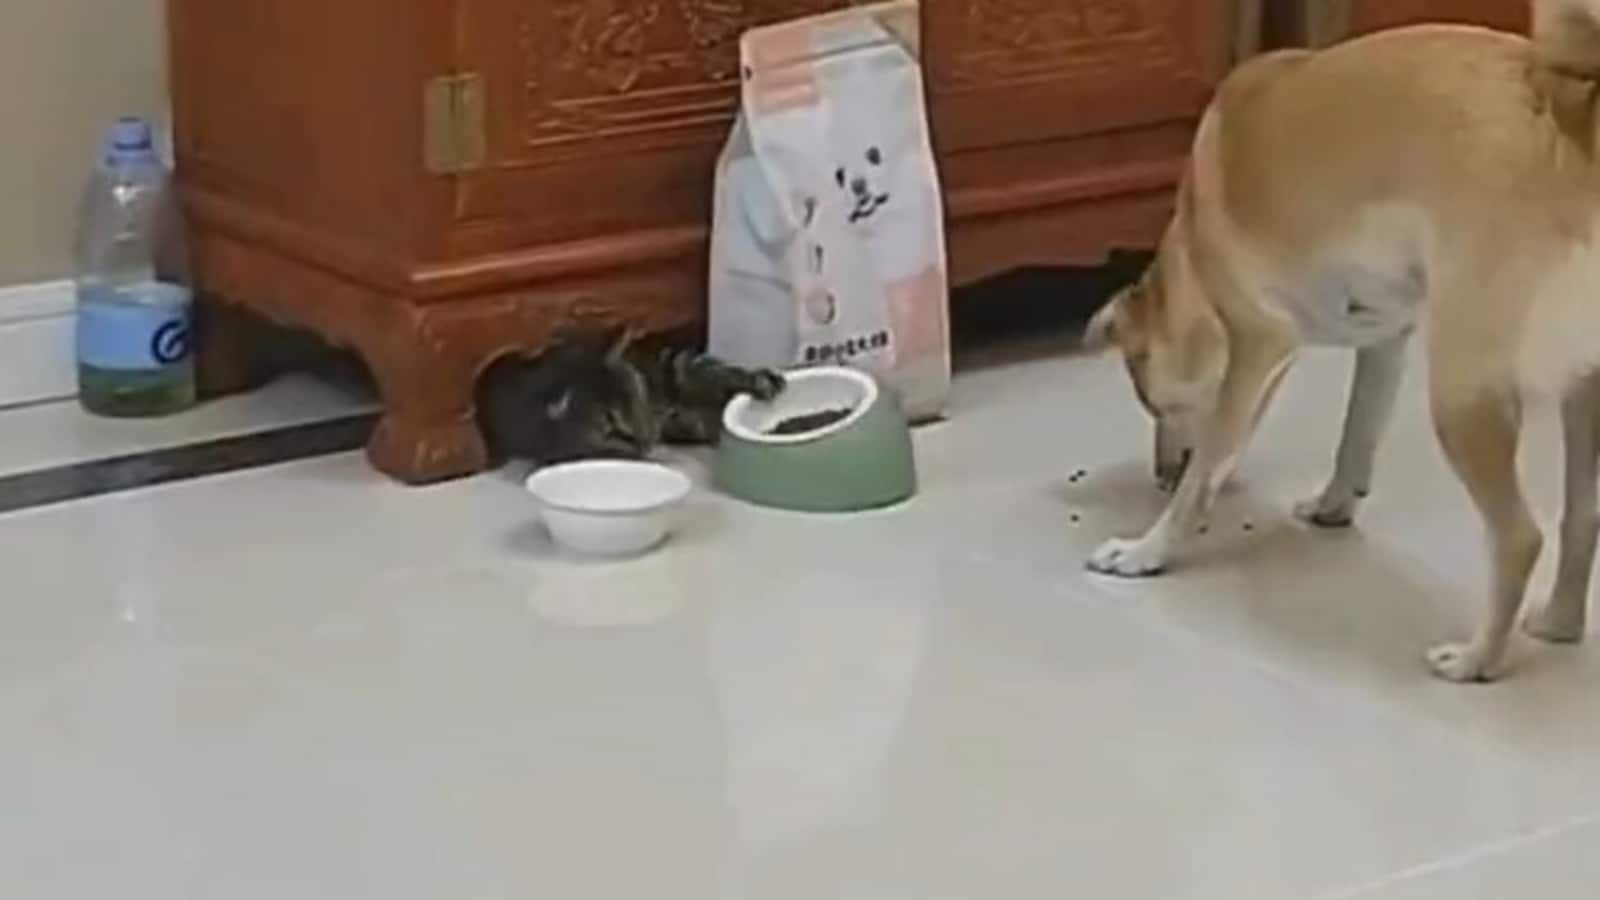 Sneaky cat snatches food bowl from dog. Watch how the pooch reacts